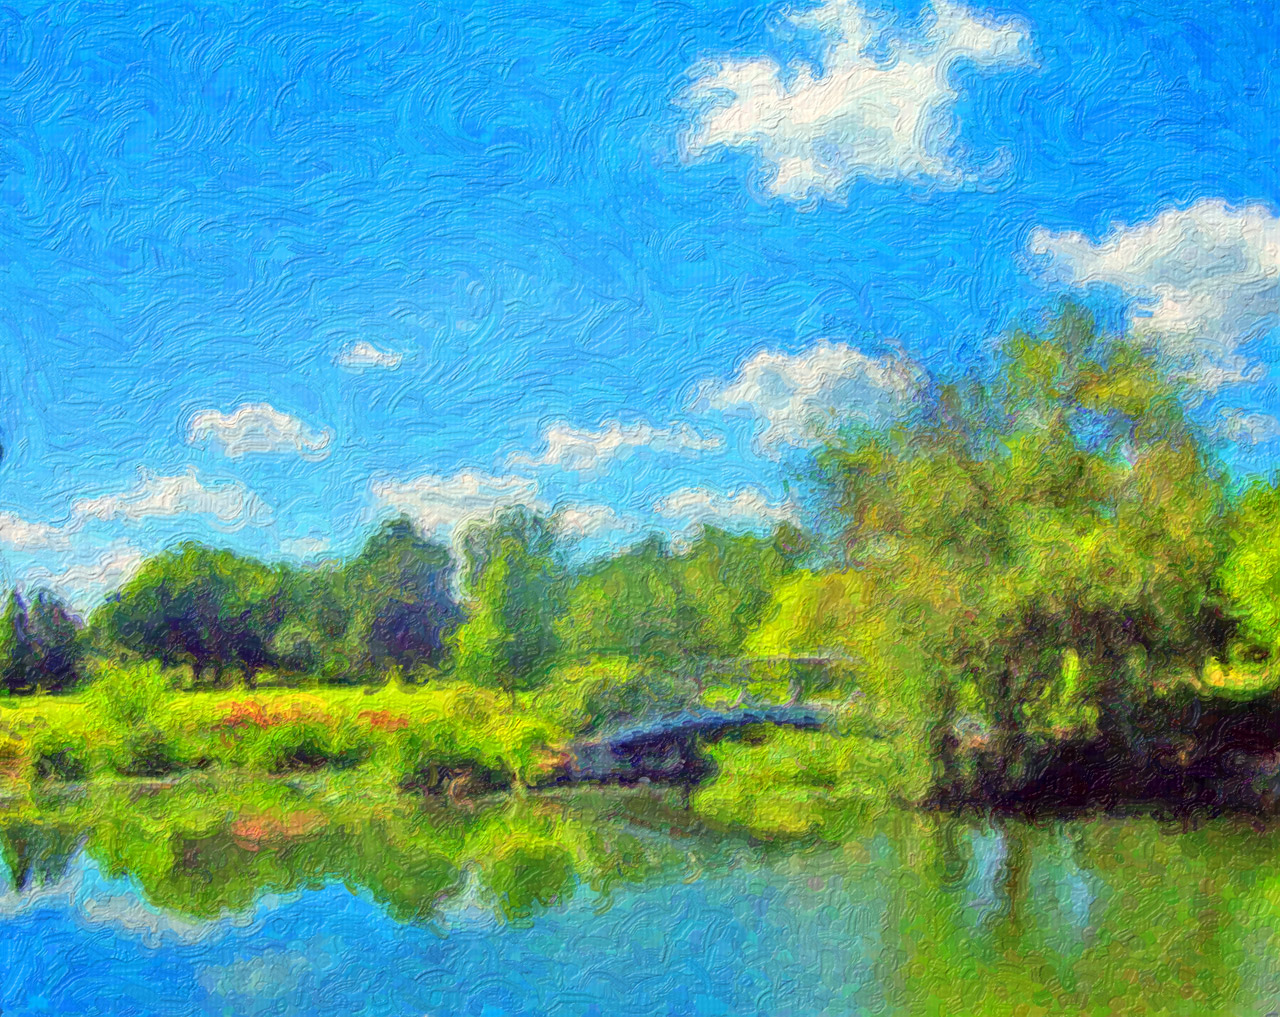 Original painting of a summer day in a park